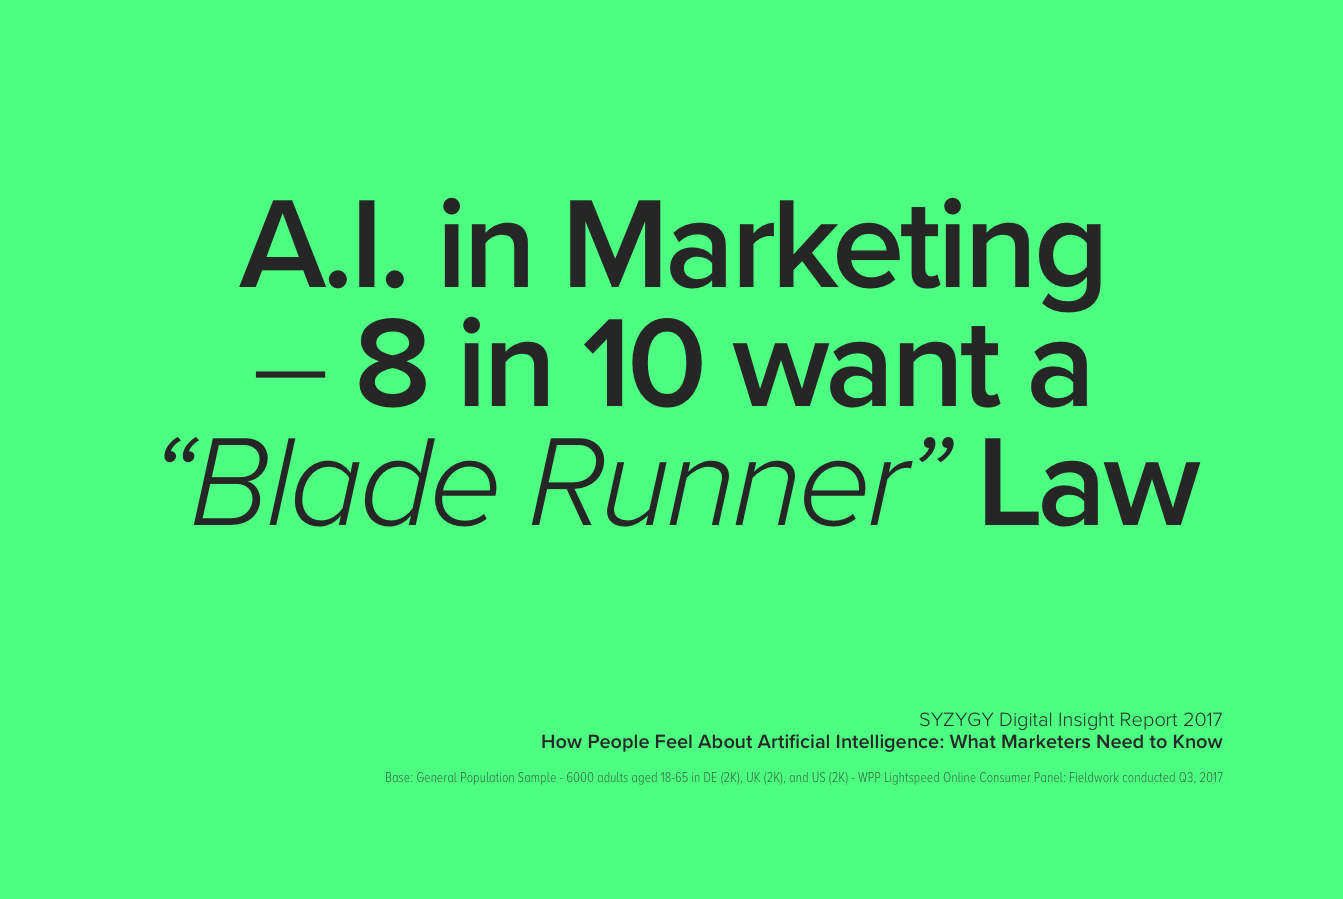 SYZYGY Uncovers “Blade Runner” Rule that Governs Use of A.I. in Marketing